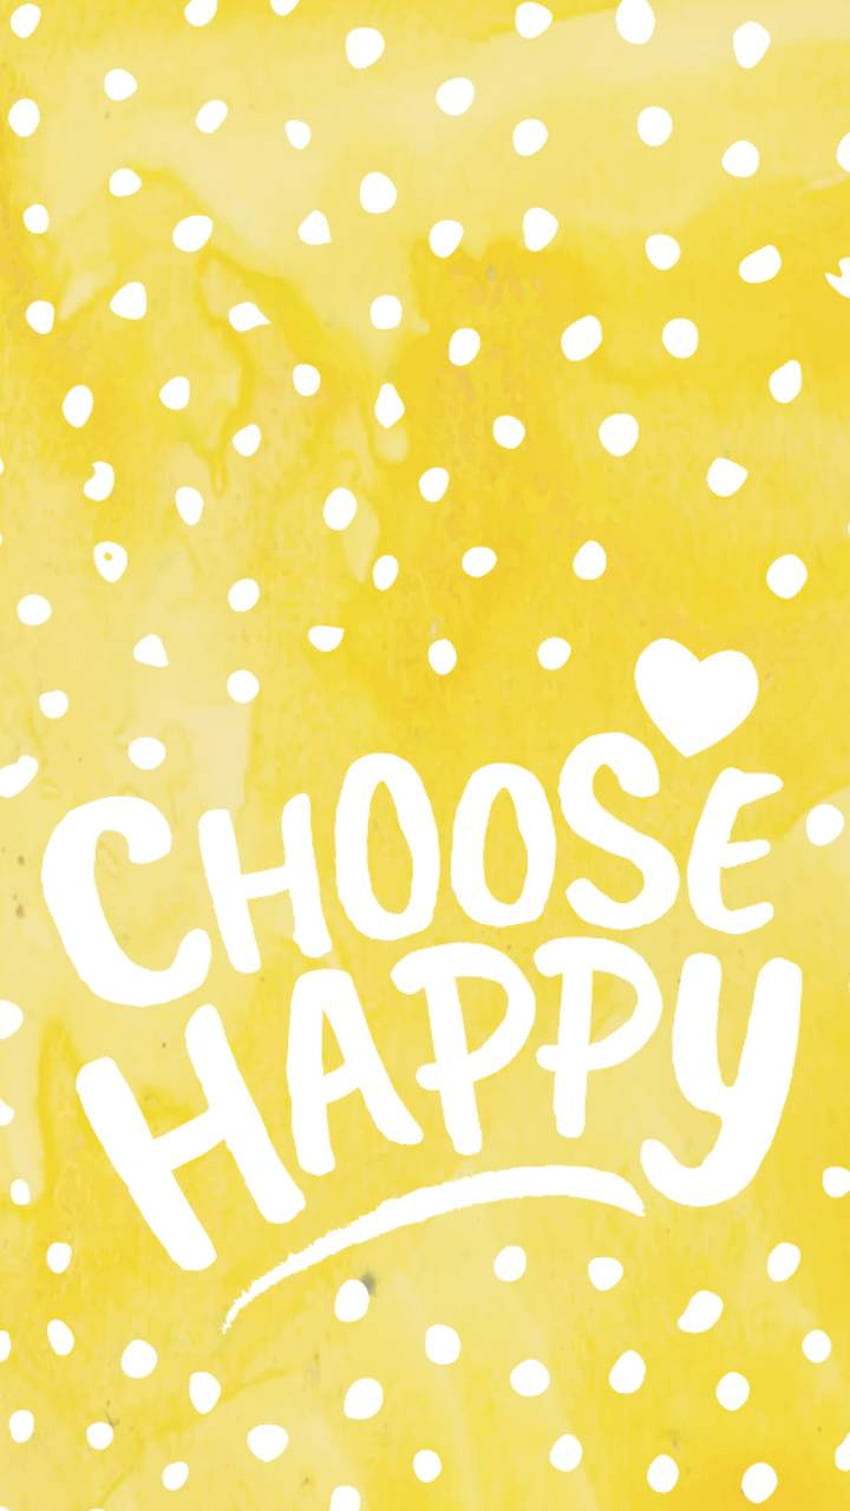 choose happy wallpaper for iphone  Happy wallpaper Iphone wallpaper Choose  happy